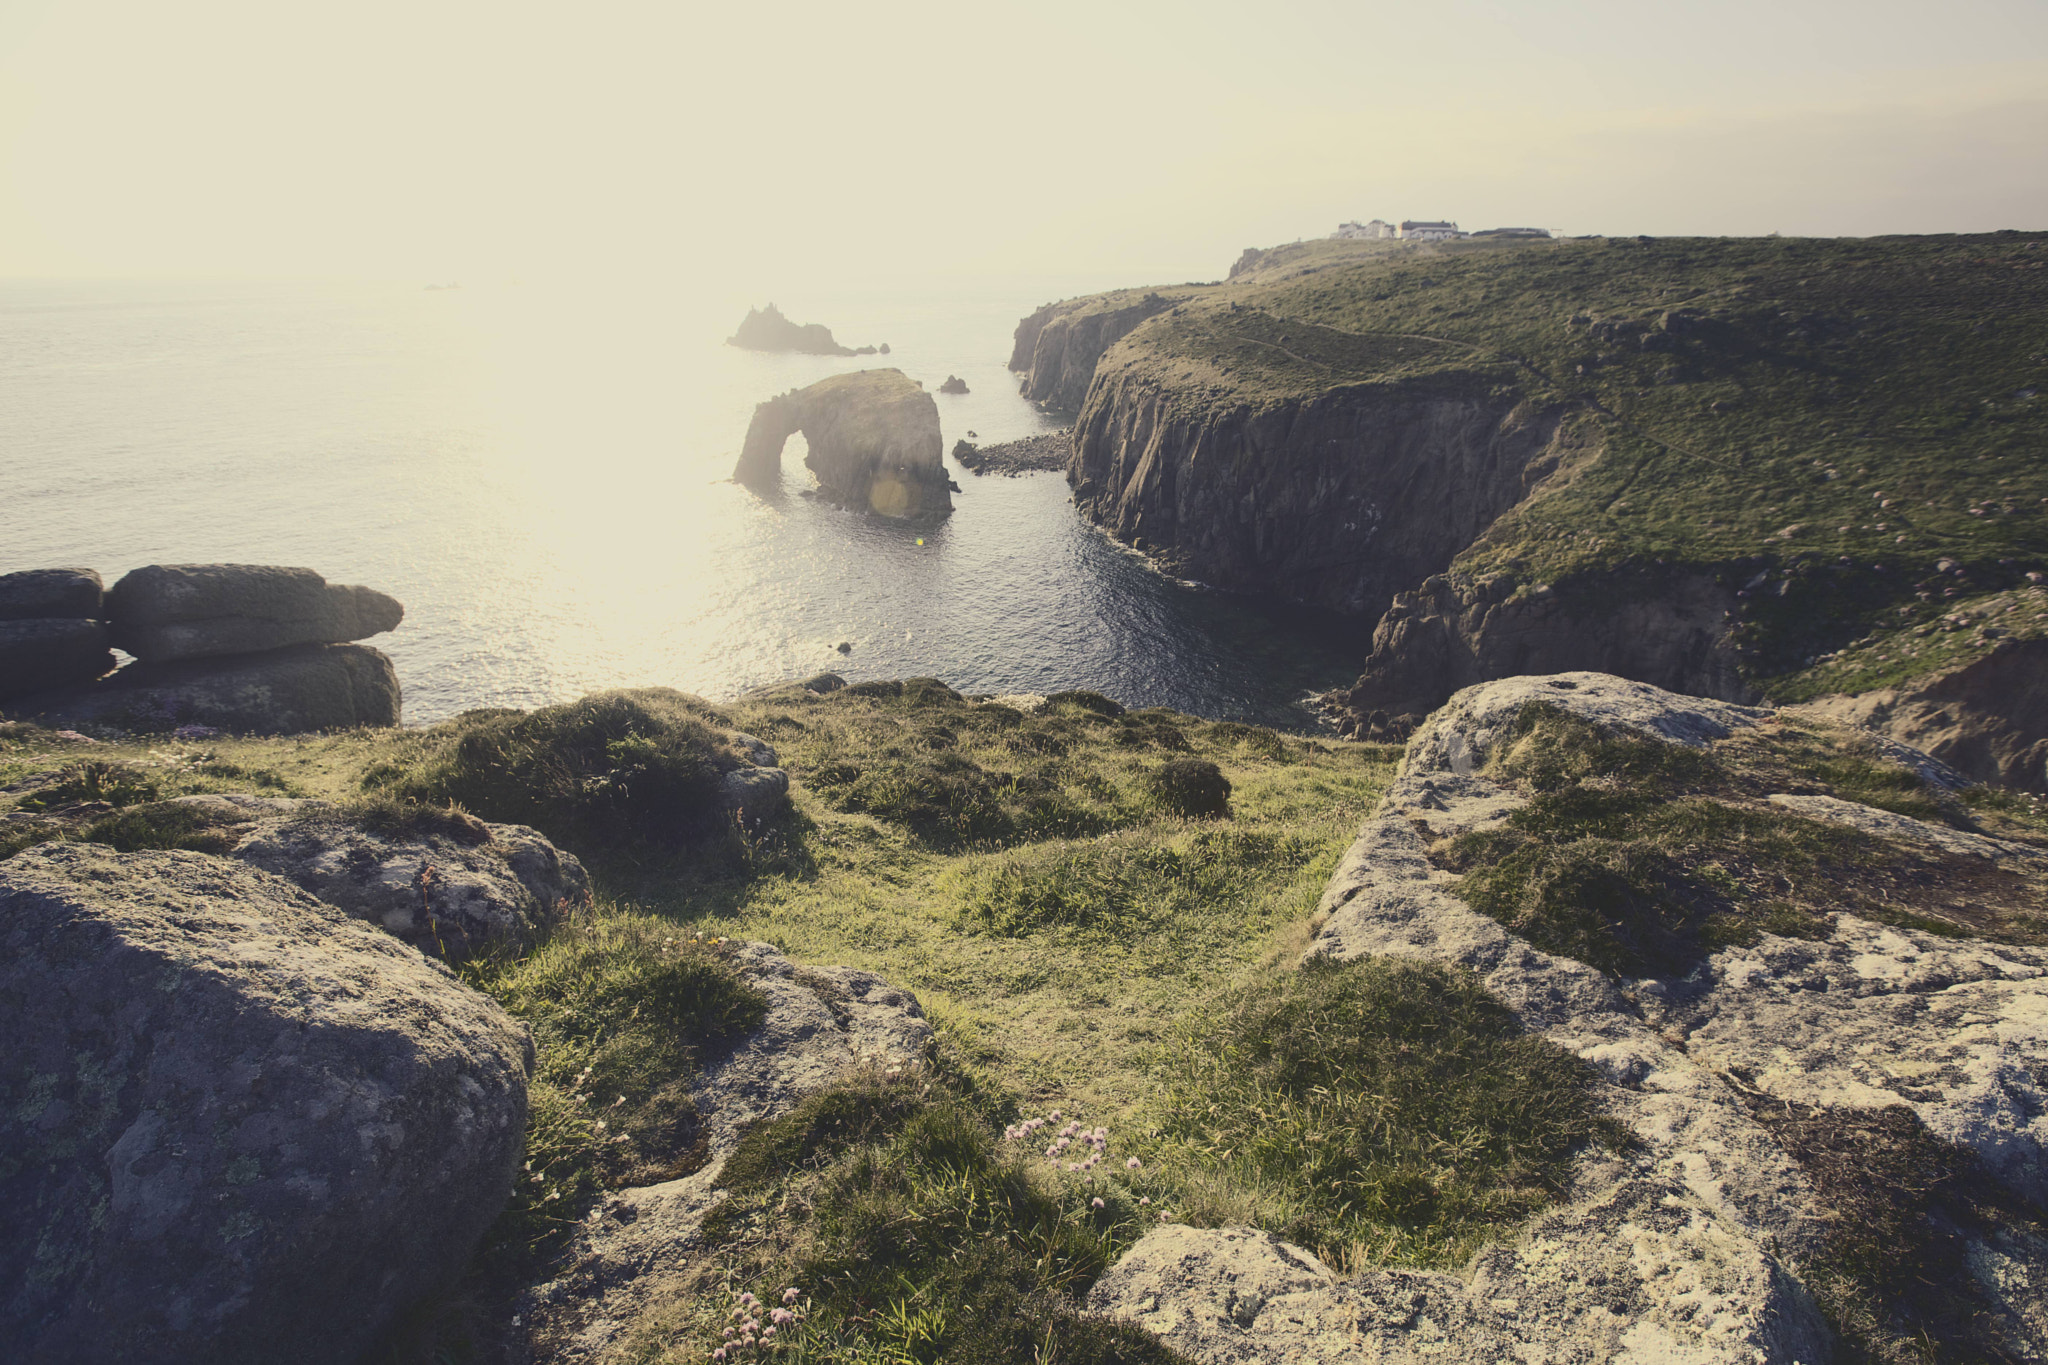 16.0 - 35.0 mm sample photo. Land's end, cornwall, uk photography